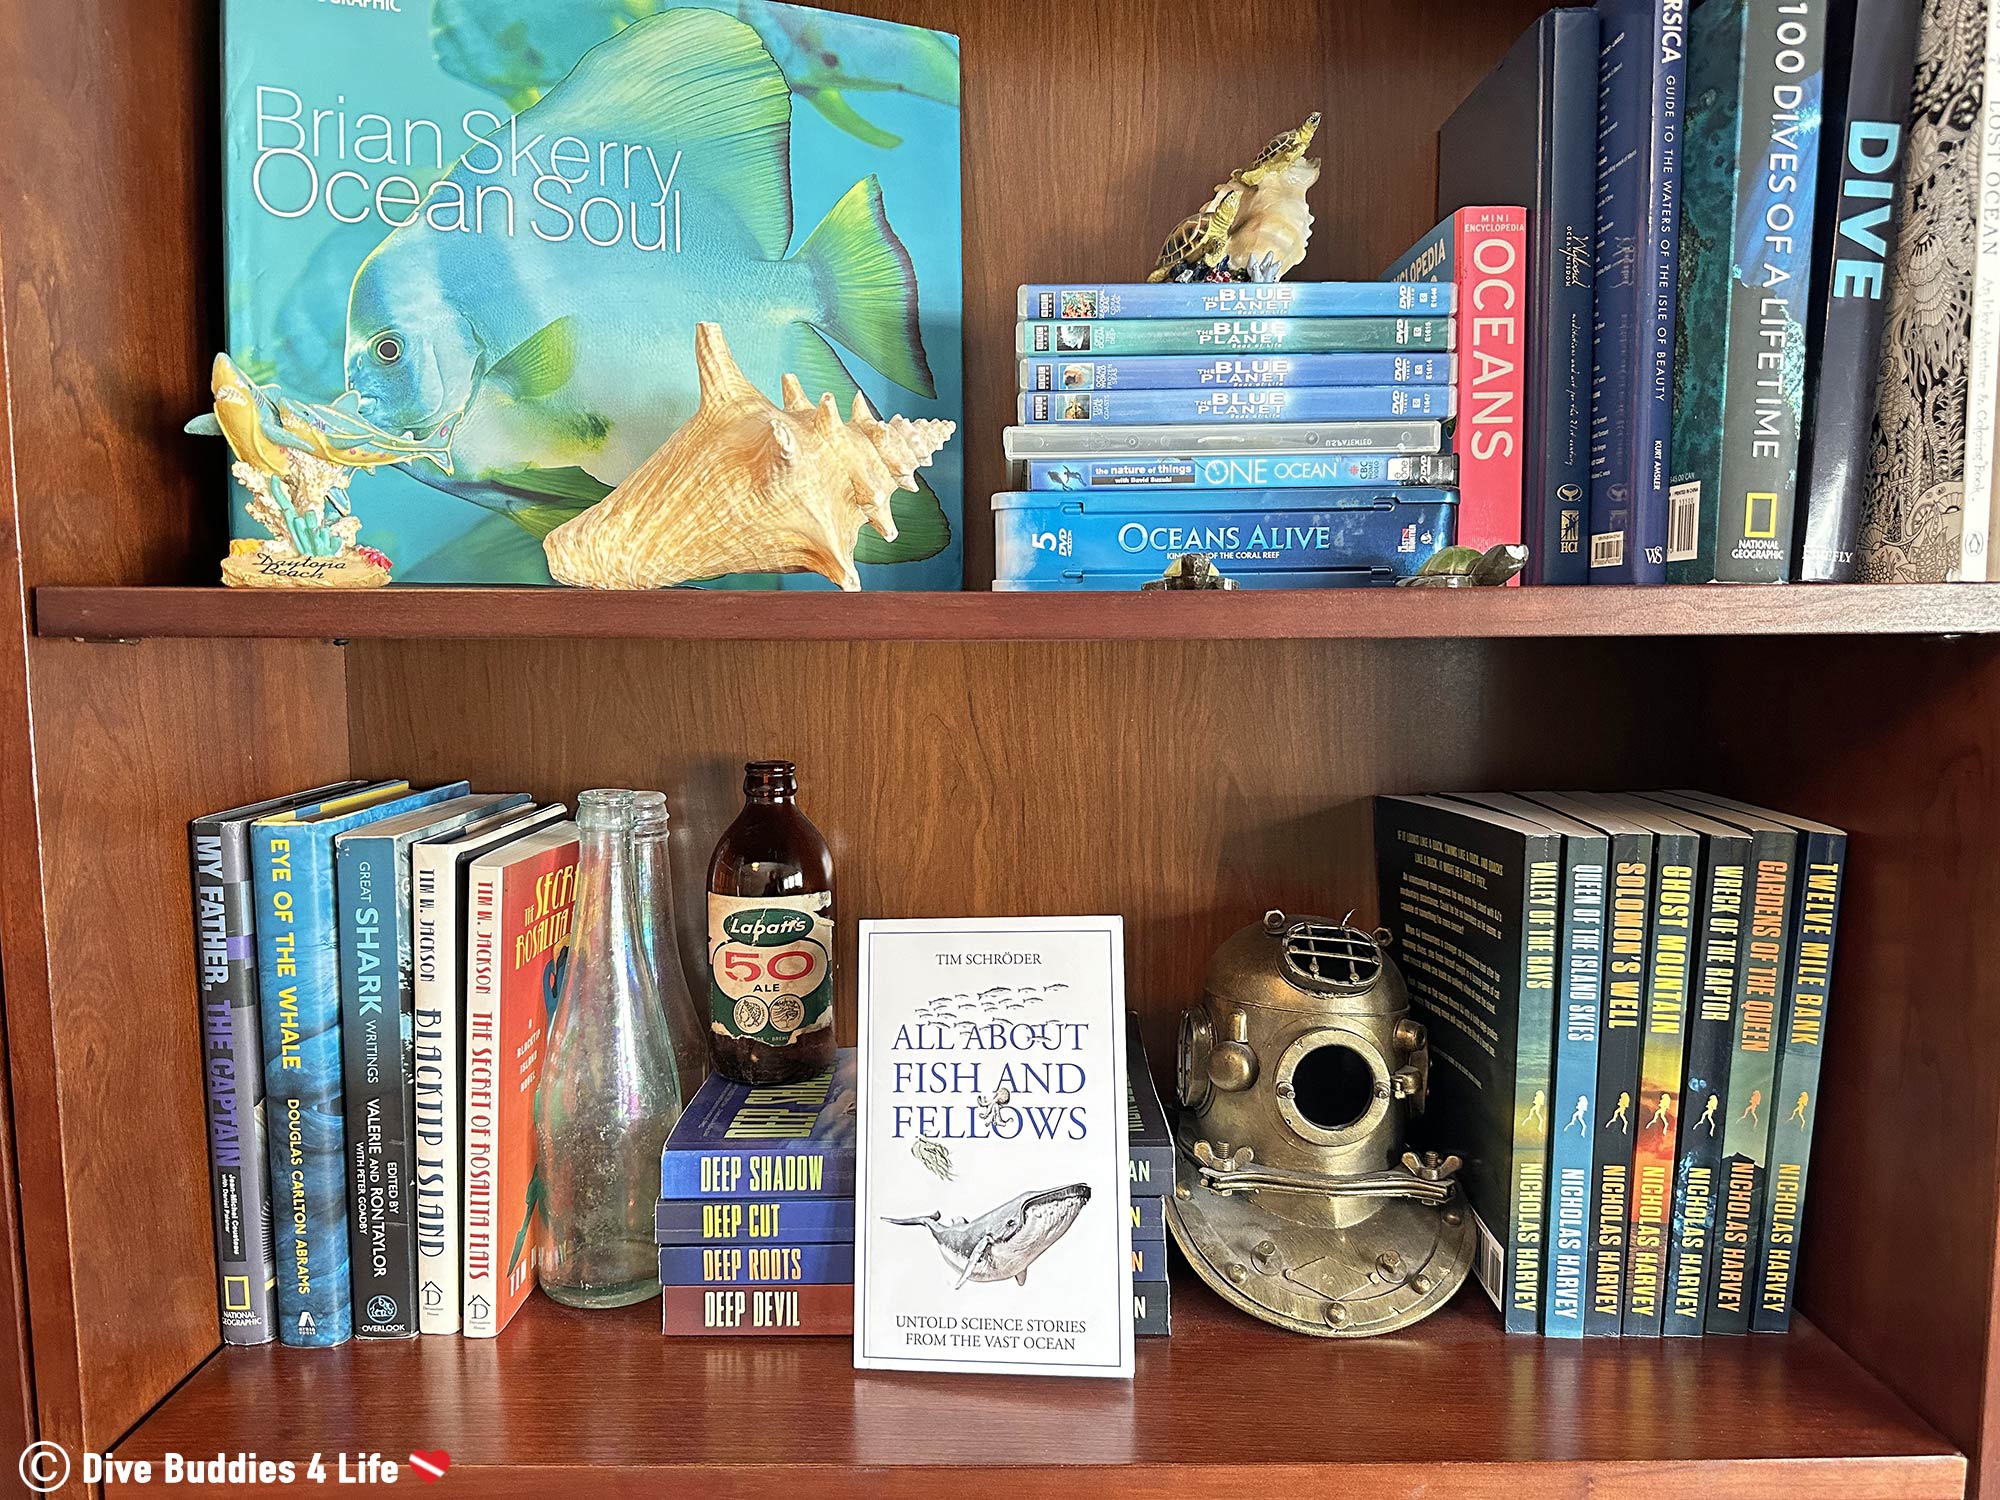 All About Fish And Fellows Science Ocean Book Added To The Scuba Diving Library